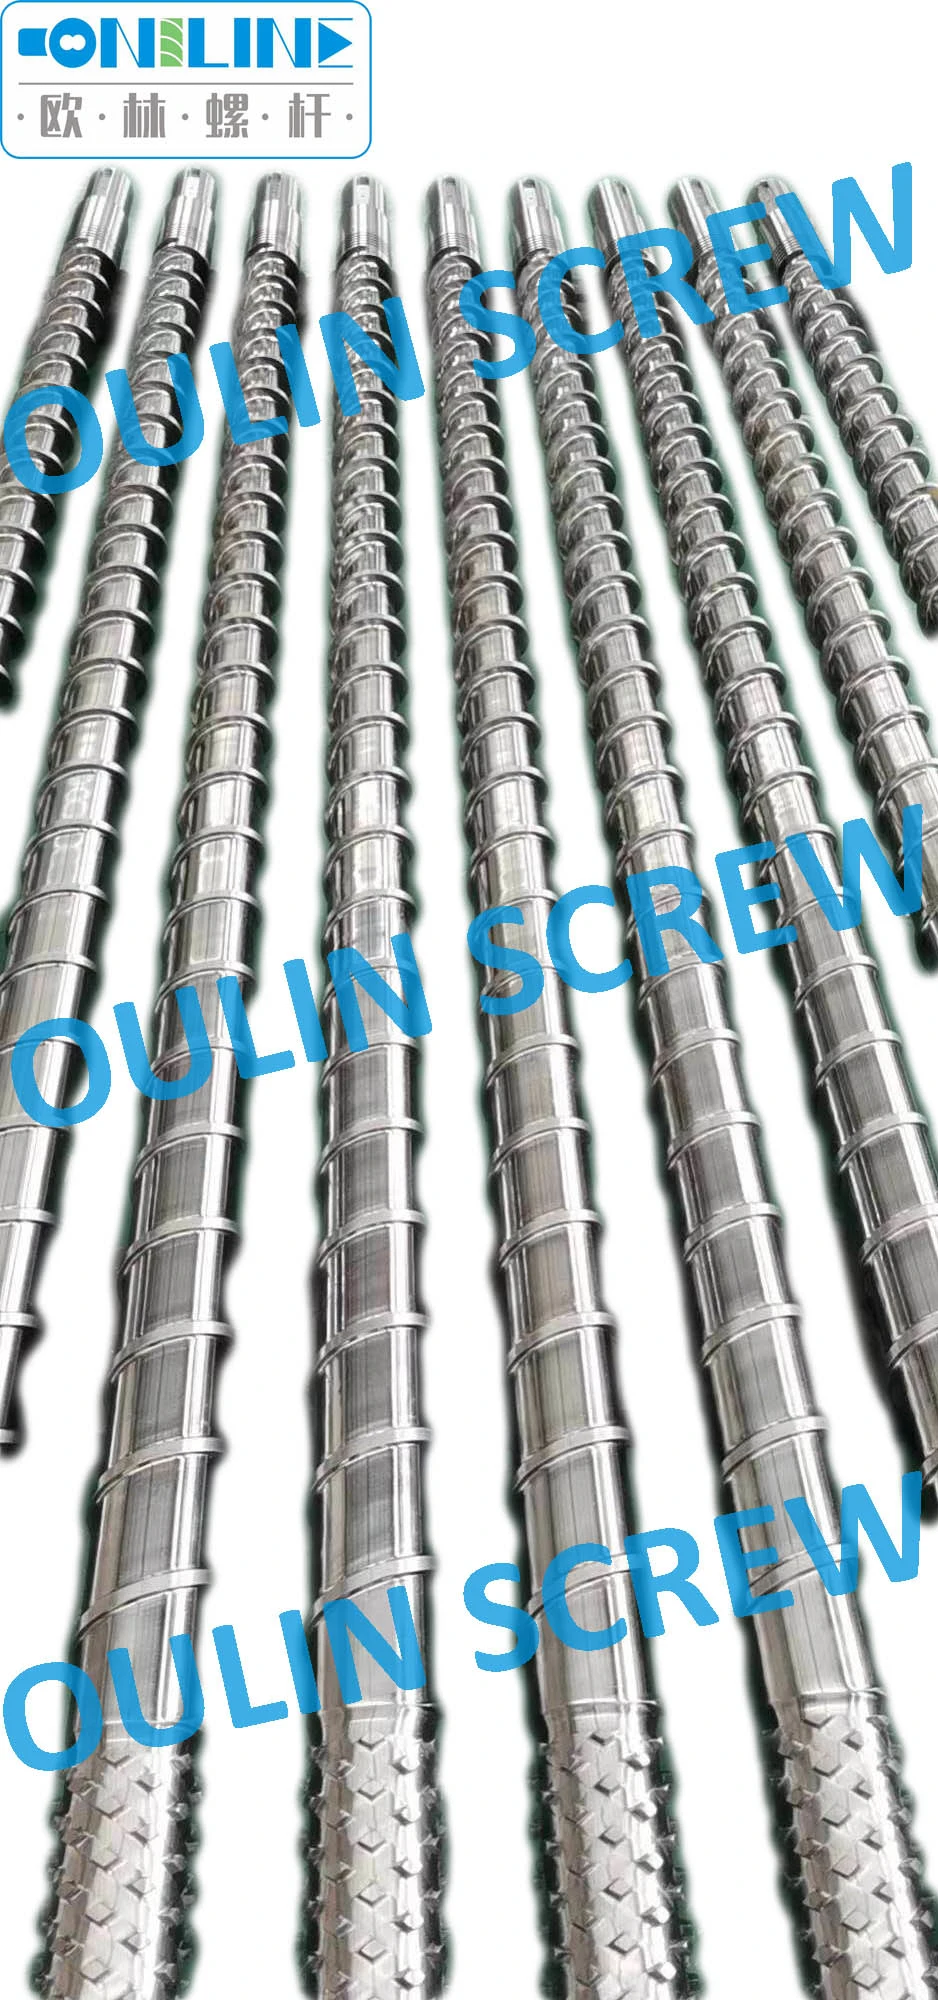 Screw and Barrel for PP Melt-Blown Fabric, Non-Woven Fabrics